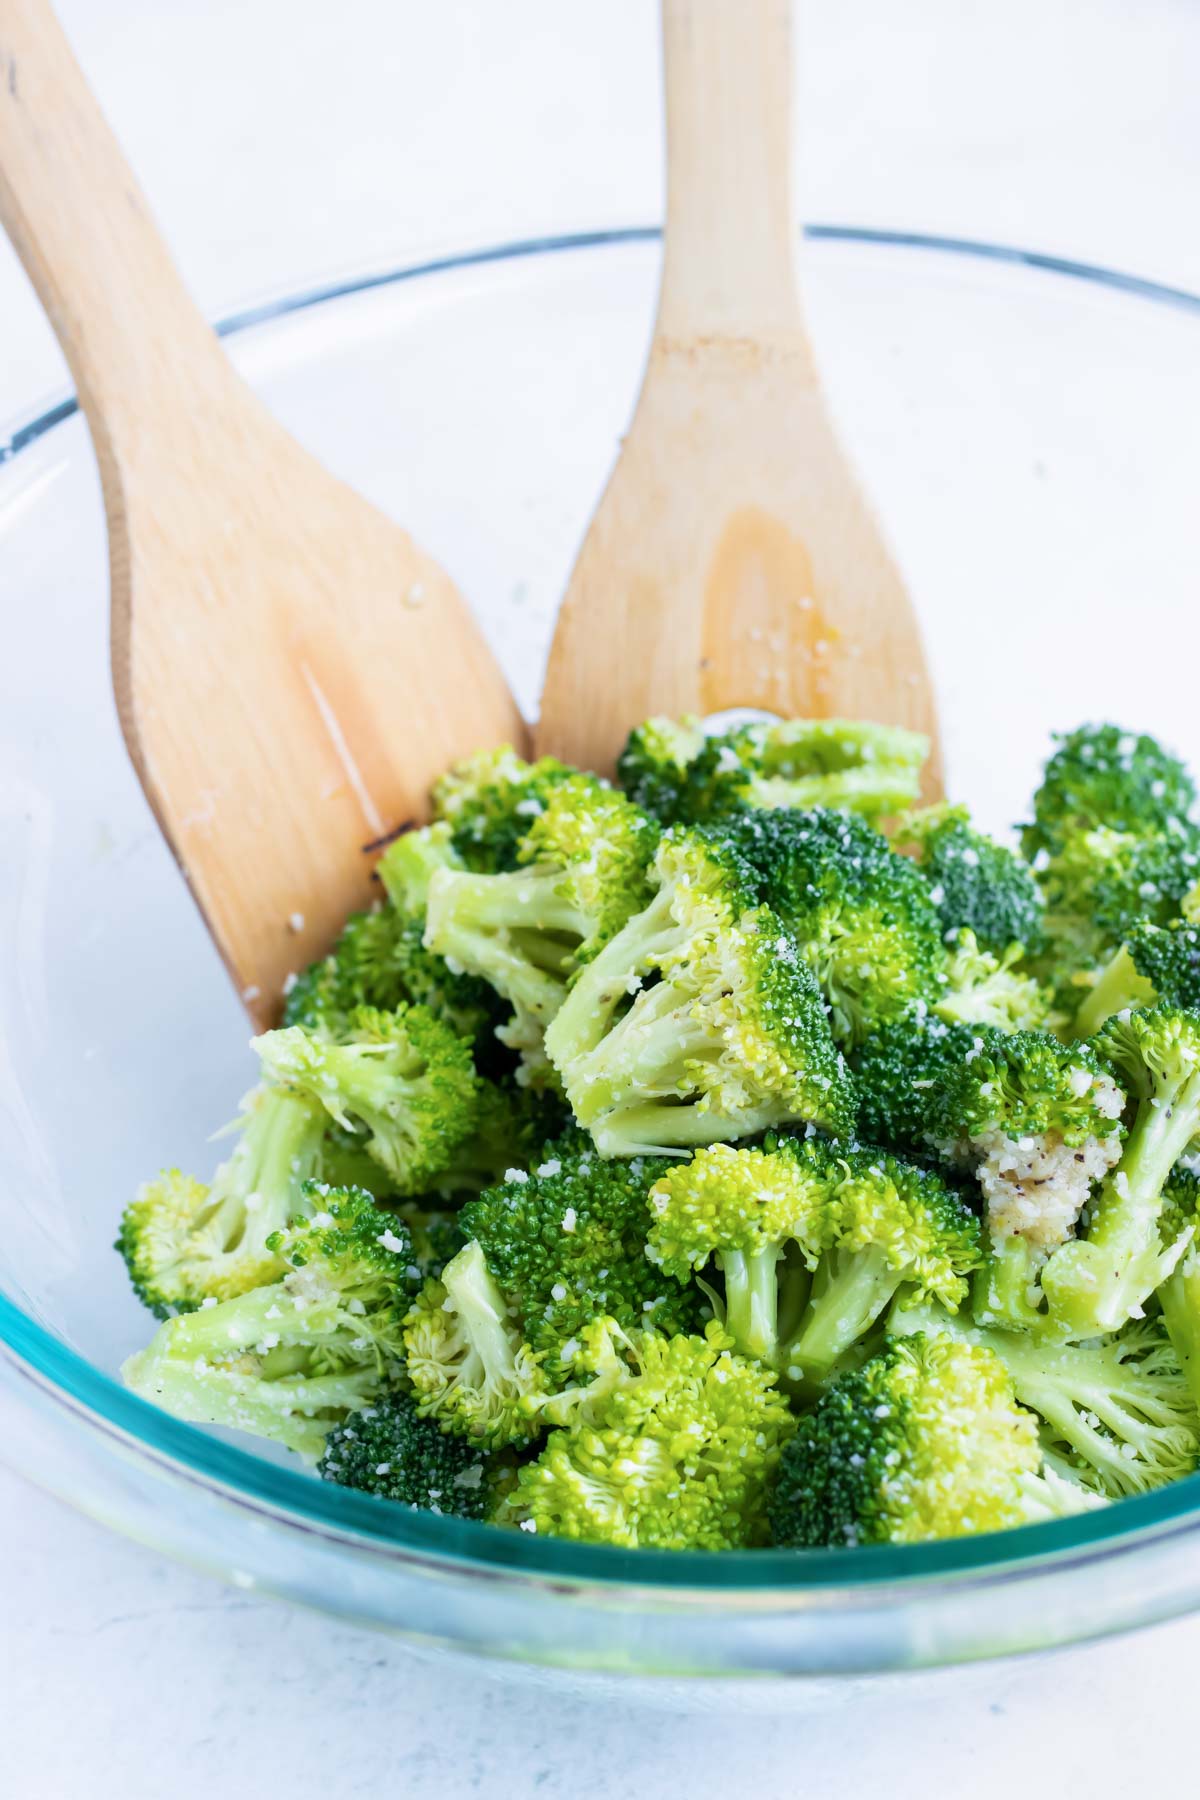 In a bowl, mix broccoli with the garlic butter mixture before being baked.